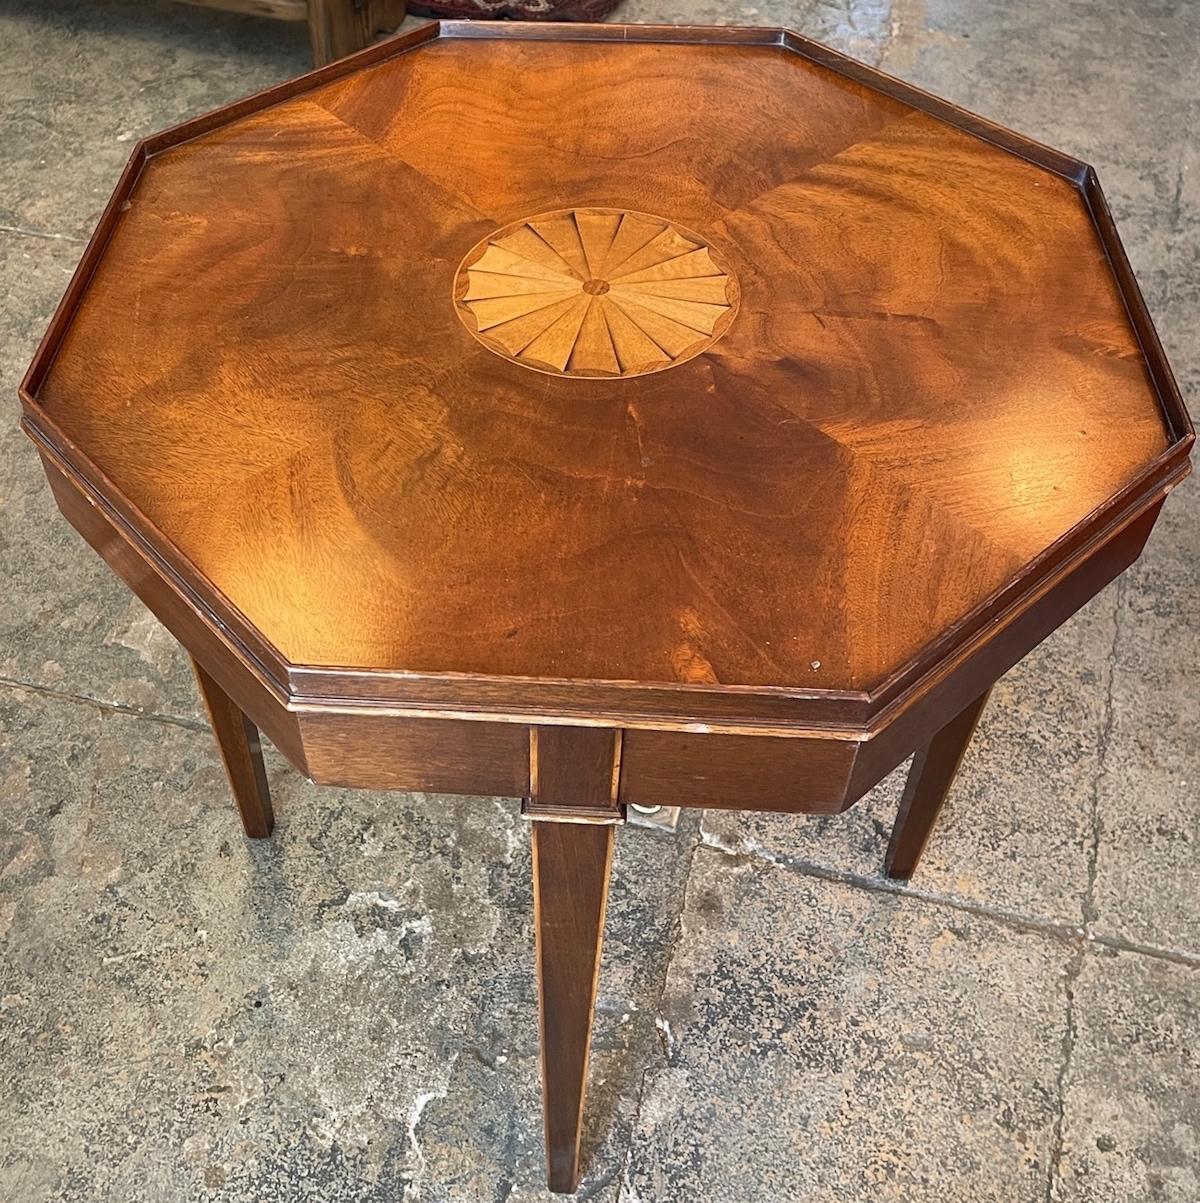 This is a very unique 19th century walnut end table with elaborate centre rosewood inlay. It has a slight raised surround.